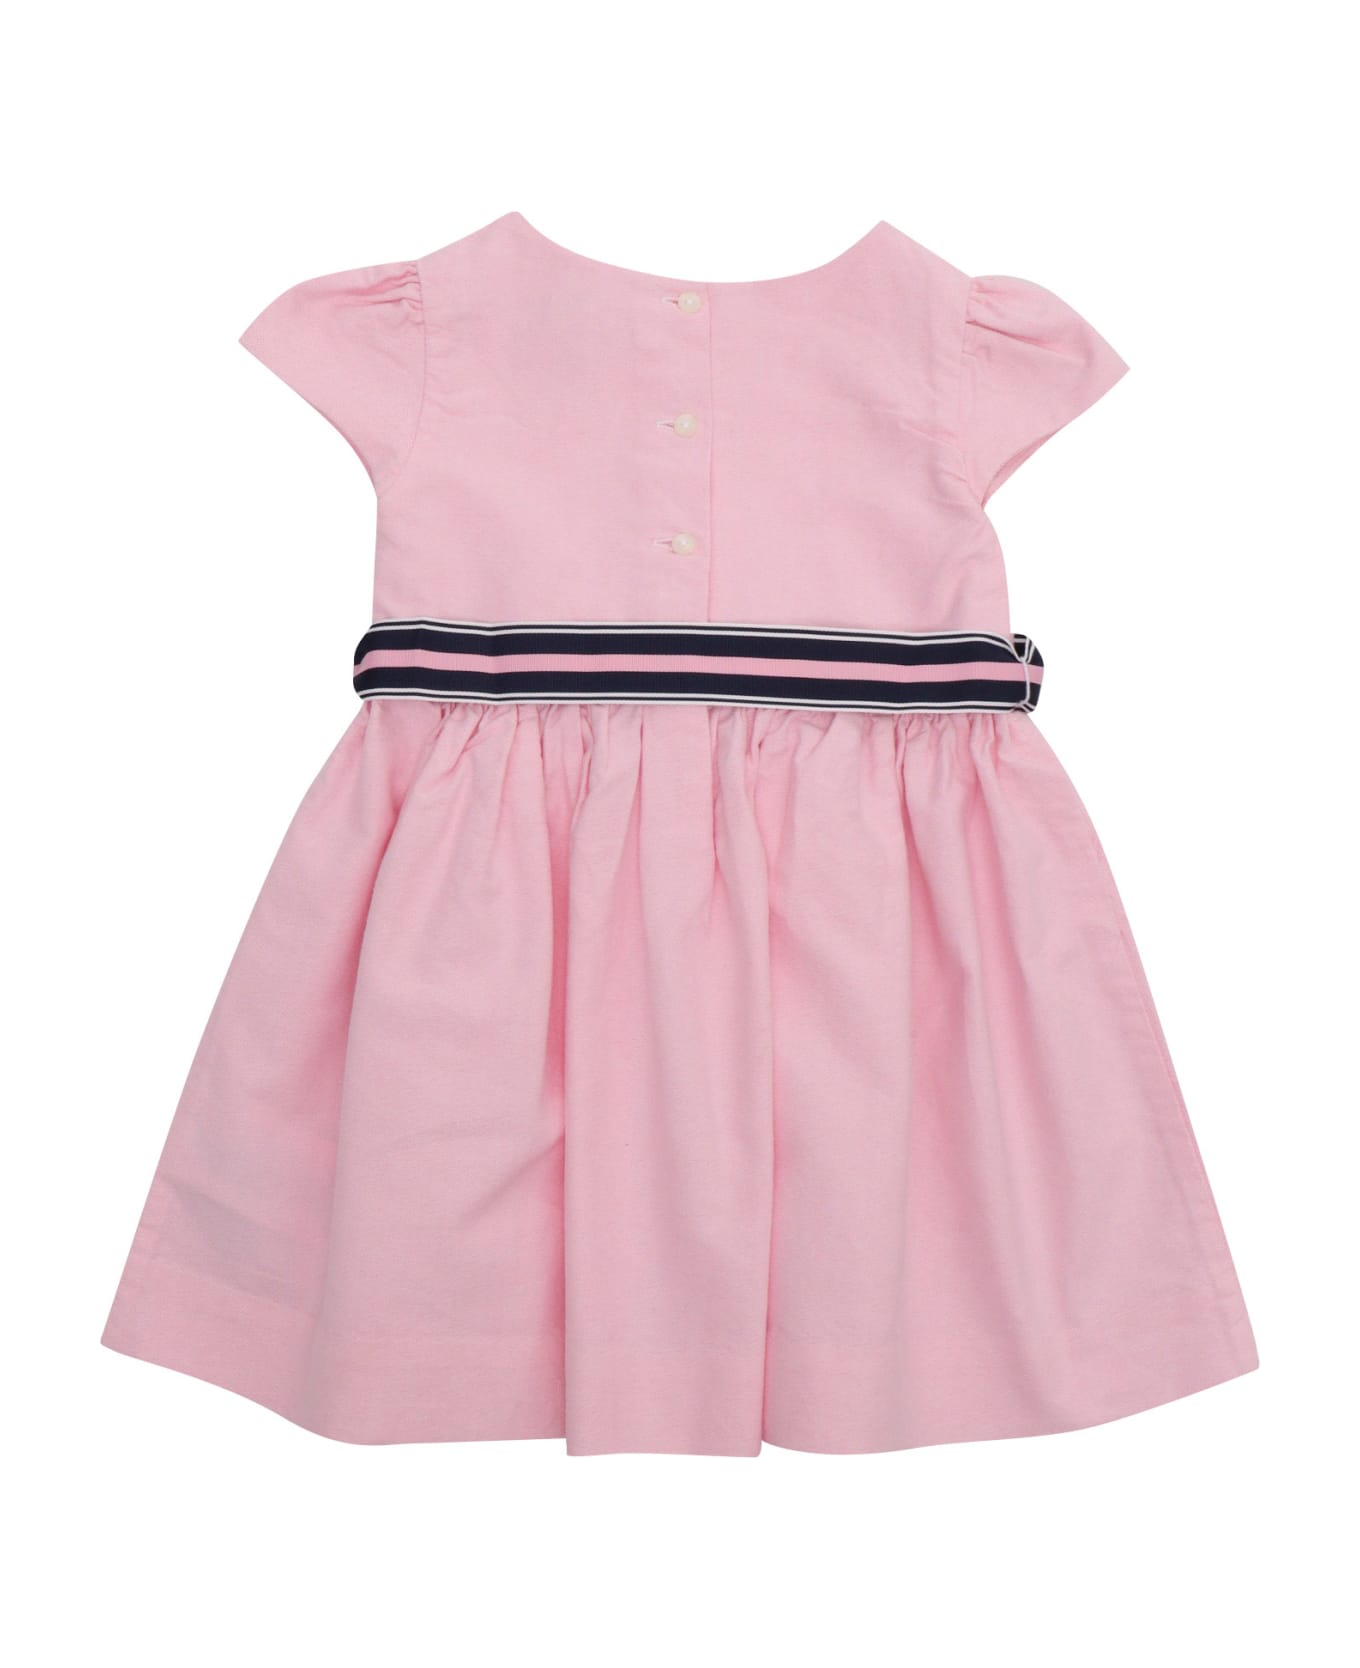 Polo Ralph Lauren Pink Dress With Bow - PINK ワンピース＆ドレス